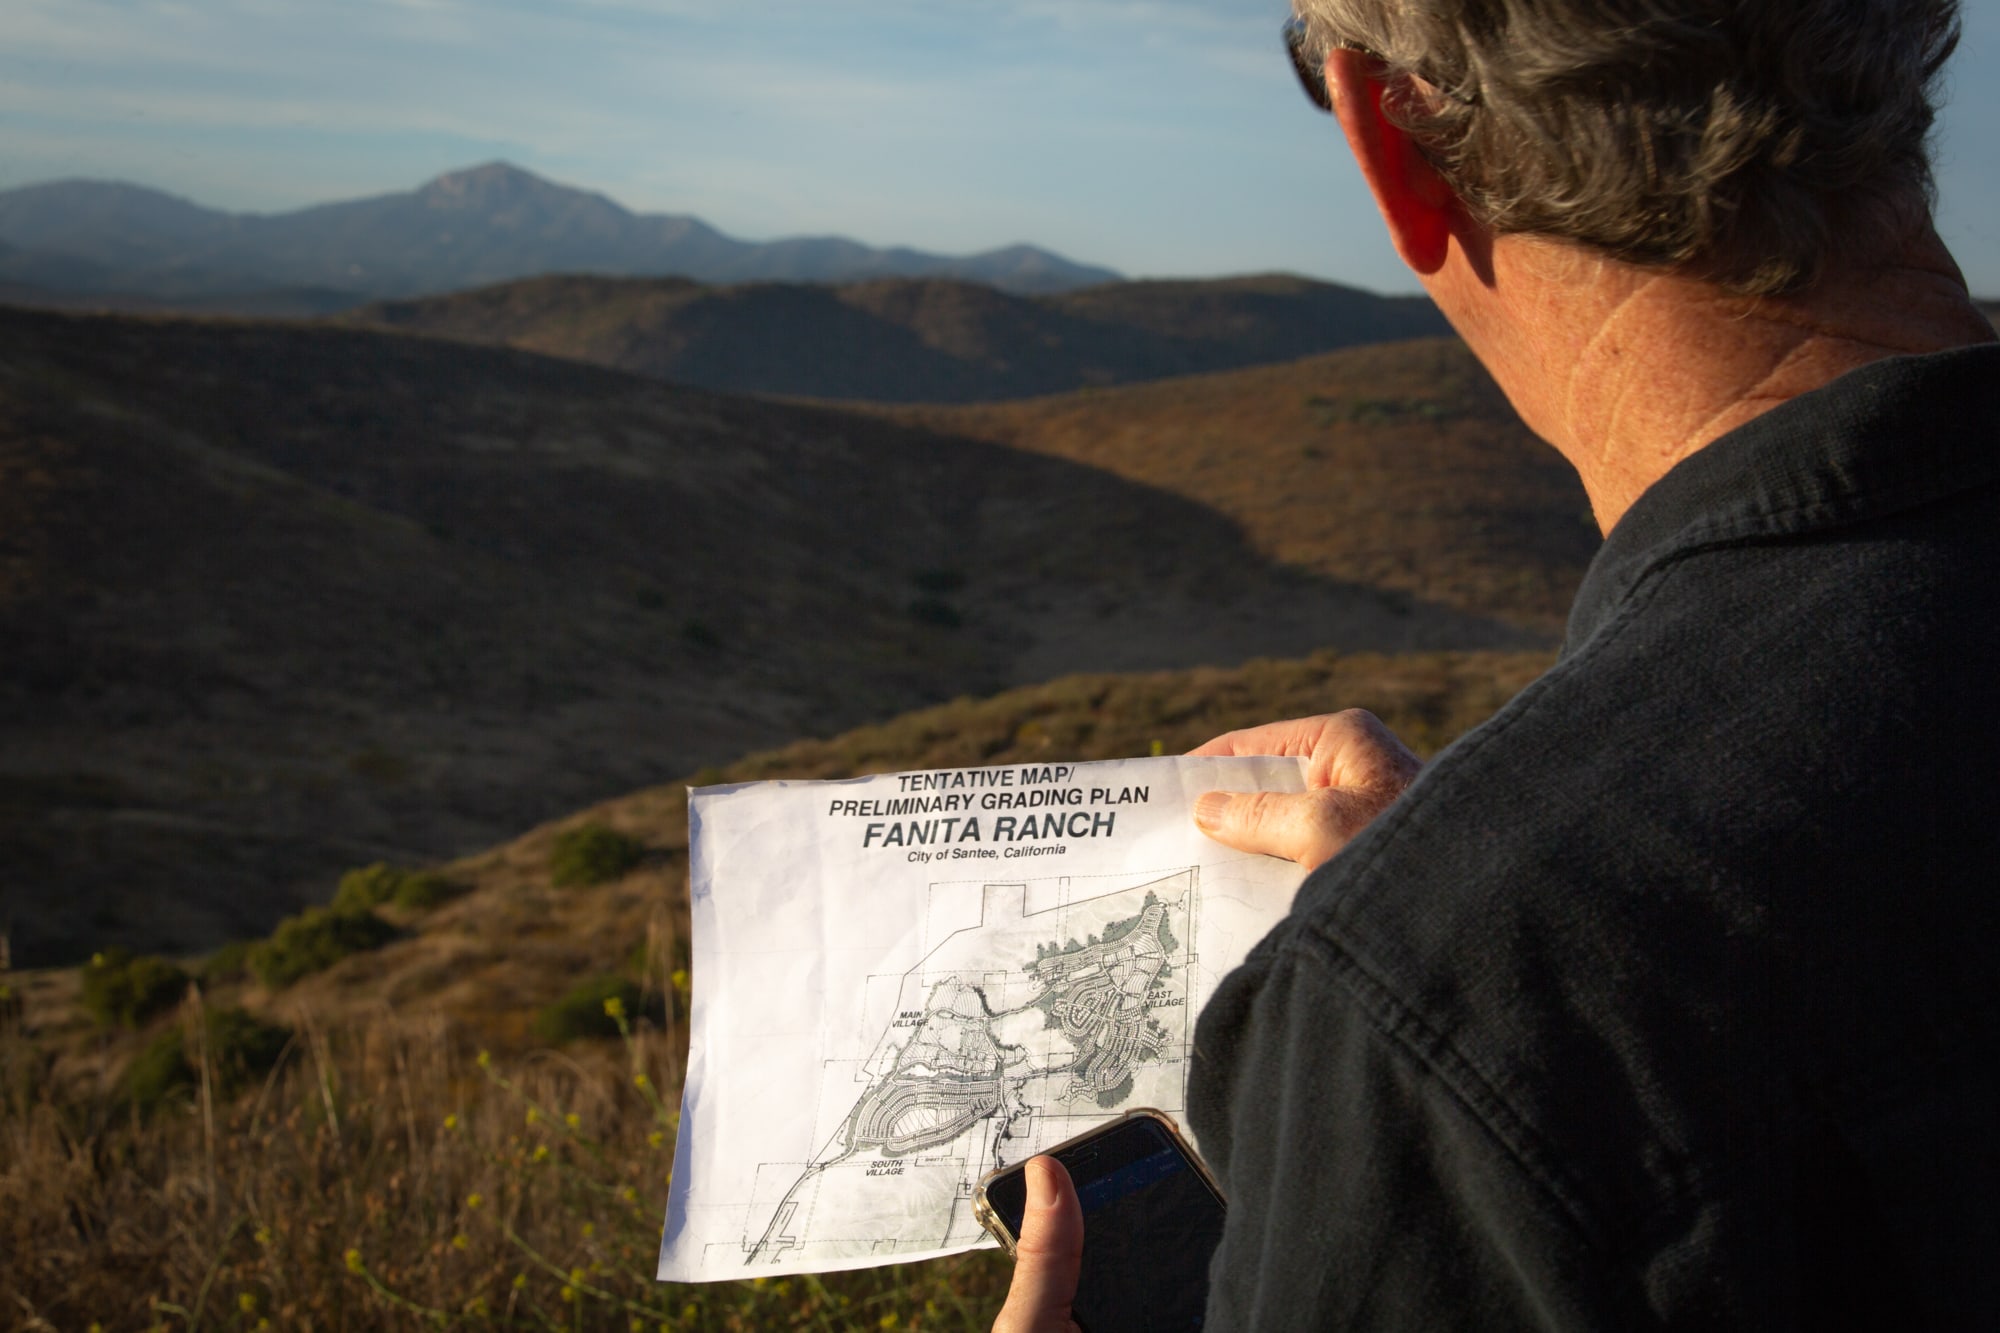 Van Collinsworth, a former firefighter with the U.S. Forest Service, checks the proposed layout of Fanita Ranch, a development in Santee, California. Fanita Ranch had gone back and forth between planning and legal battles for about a decade. It initially was approved in 2007, but its environmental impact reports were declared inadequate in 2013.  (Kailey Broussard/News21)